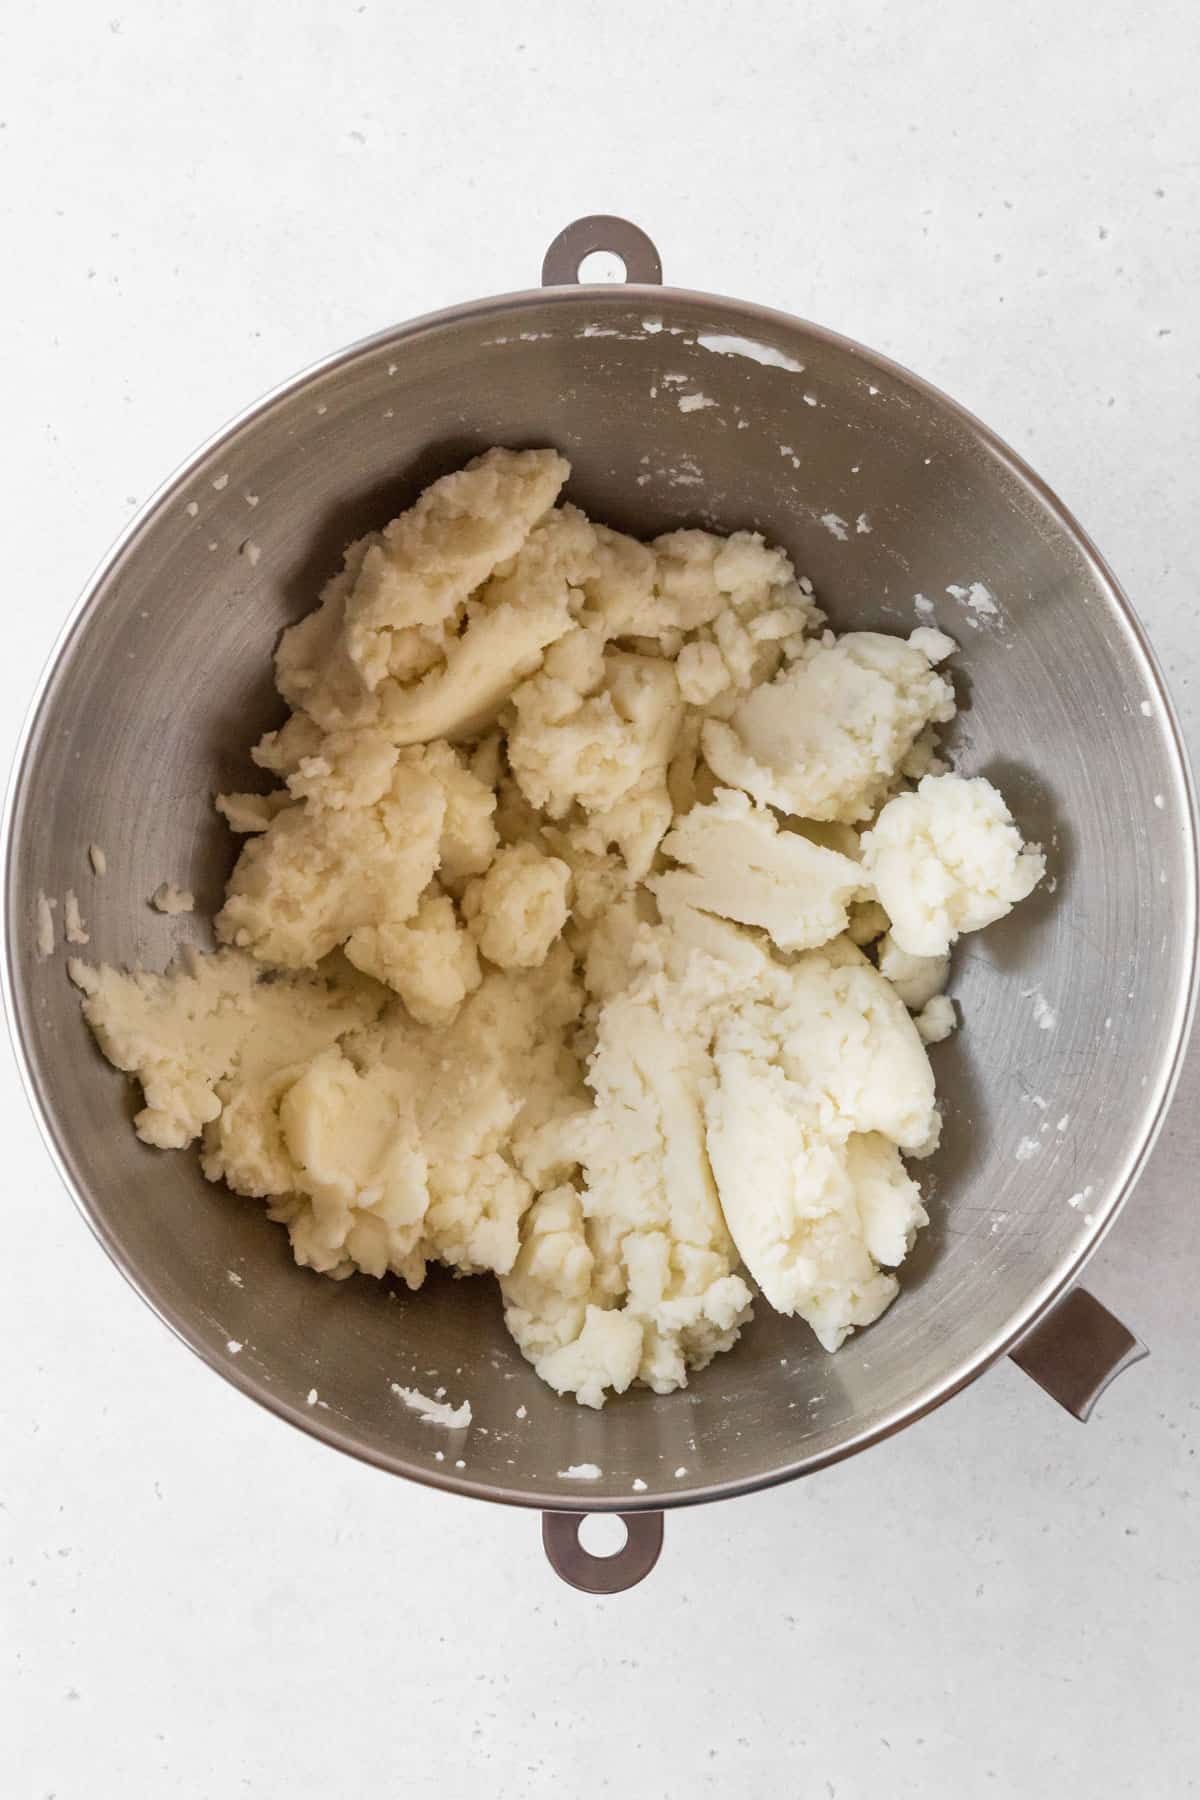 Potato mash mixture is thick and looks slightly crumbly.